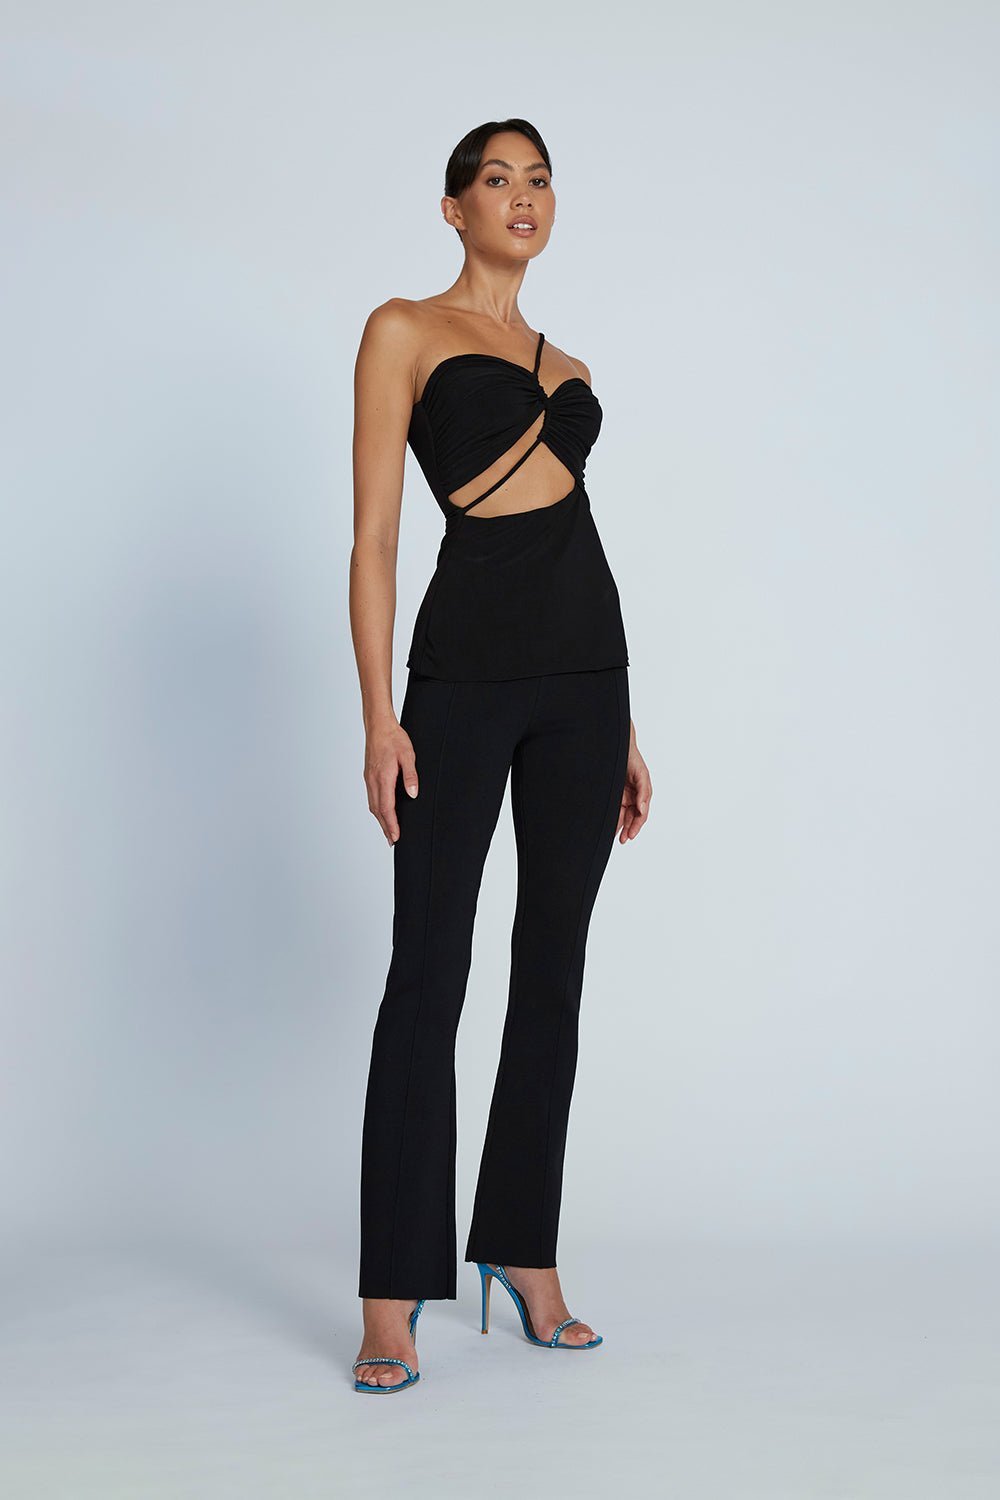 CLASSIC KNIT PANT BLACK - SUNDAY BEST TRADING CO